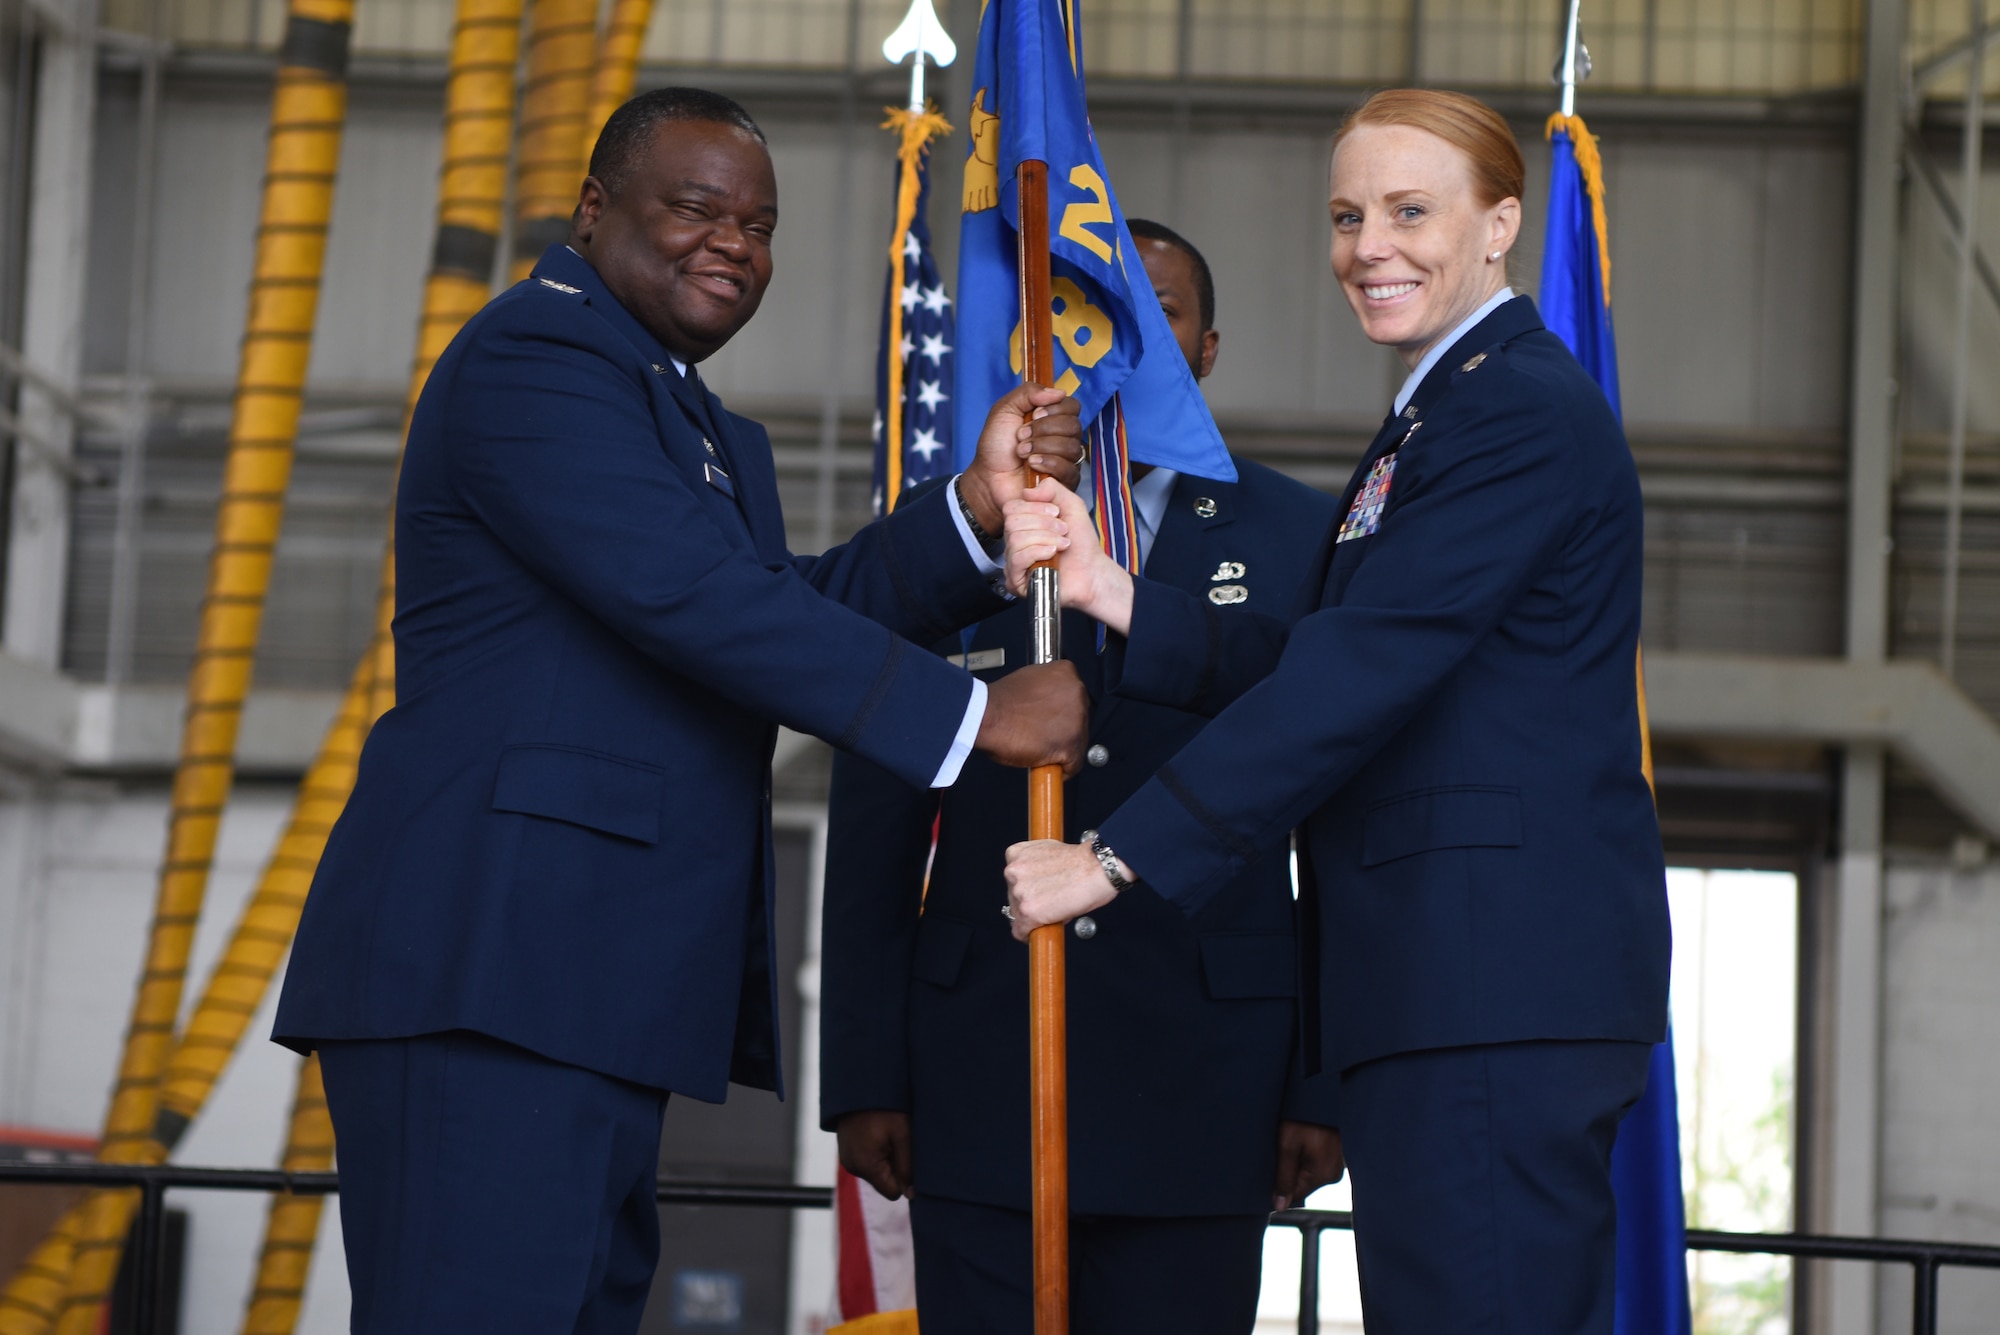 U.S. Air Force Col. John McClung, 7th Operations Group commander, presents the guidon to Lt. Col. Kristen Jenkins, incoming 28th Bomb Squadron commander, during the 28th BS change of command ceremony inside the Three Bay Hangar at Dyess Air Force Base, Texas, April 22, 2022. The 28th BS is the largest bomb squadron in the Air Force and the largest flying squadron in Air Force Global Strike Command. (U.S. Air Force photo by Staff Sgt. Holly Cook)